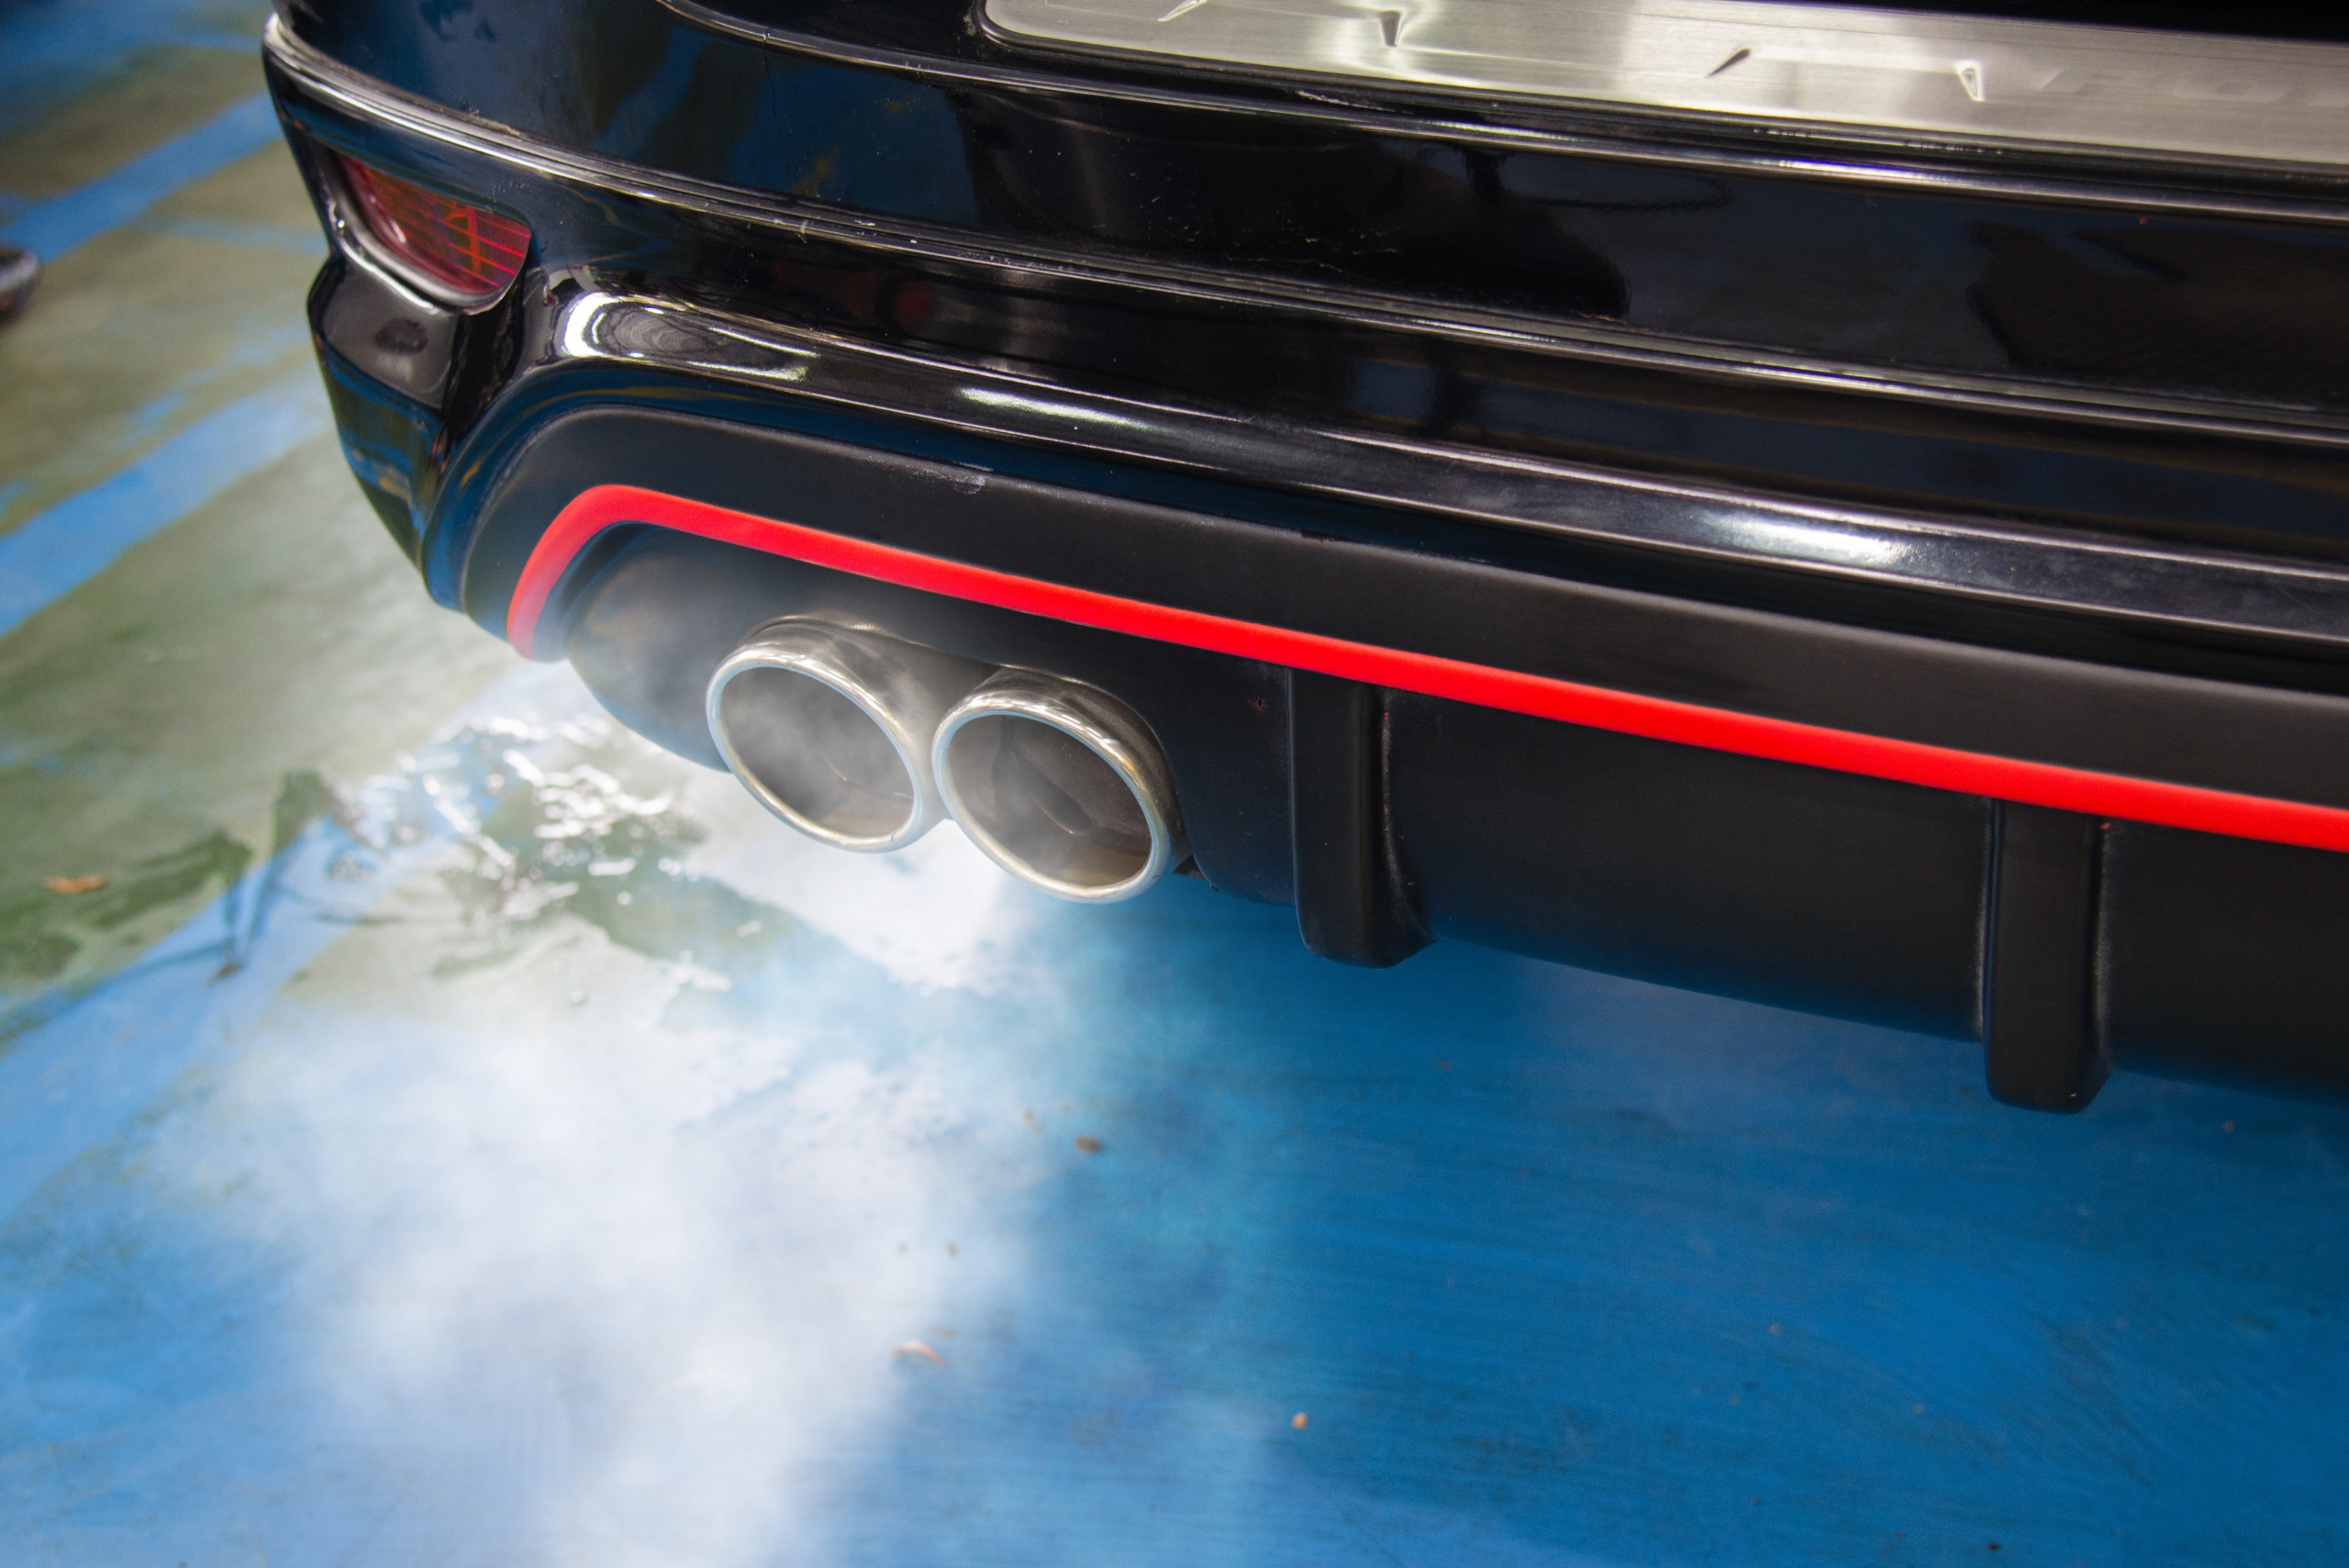 Closeup of car's exhaust while the engine is running.